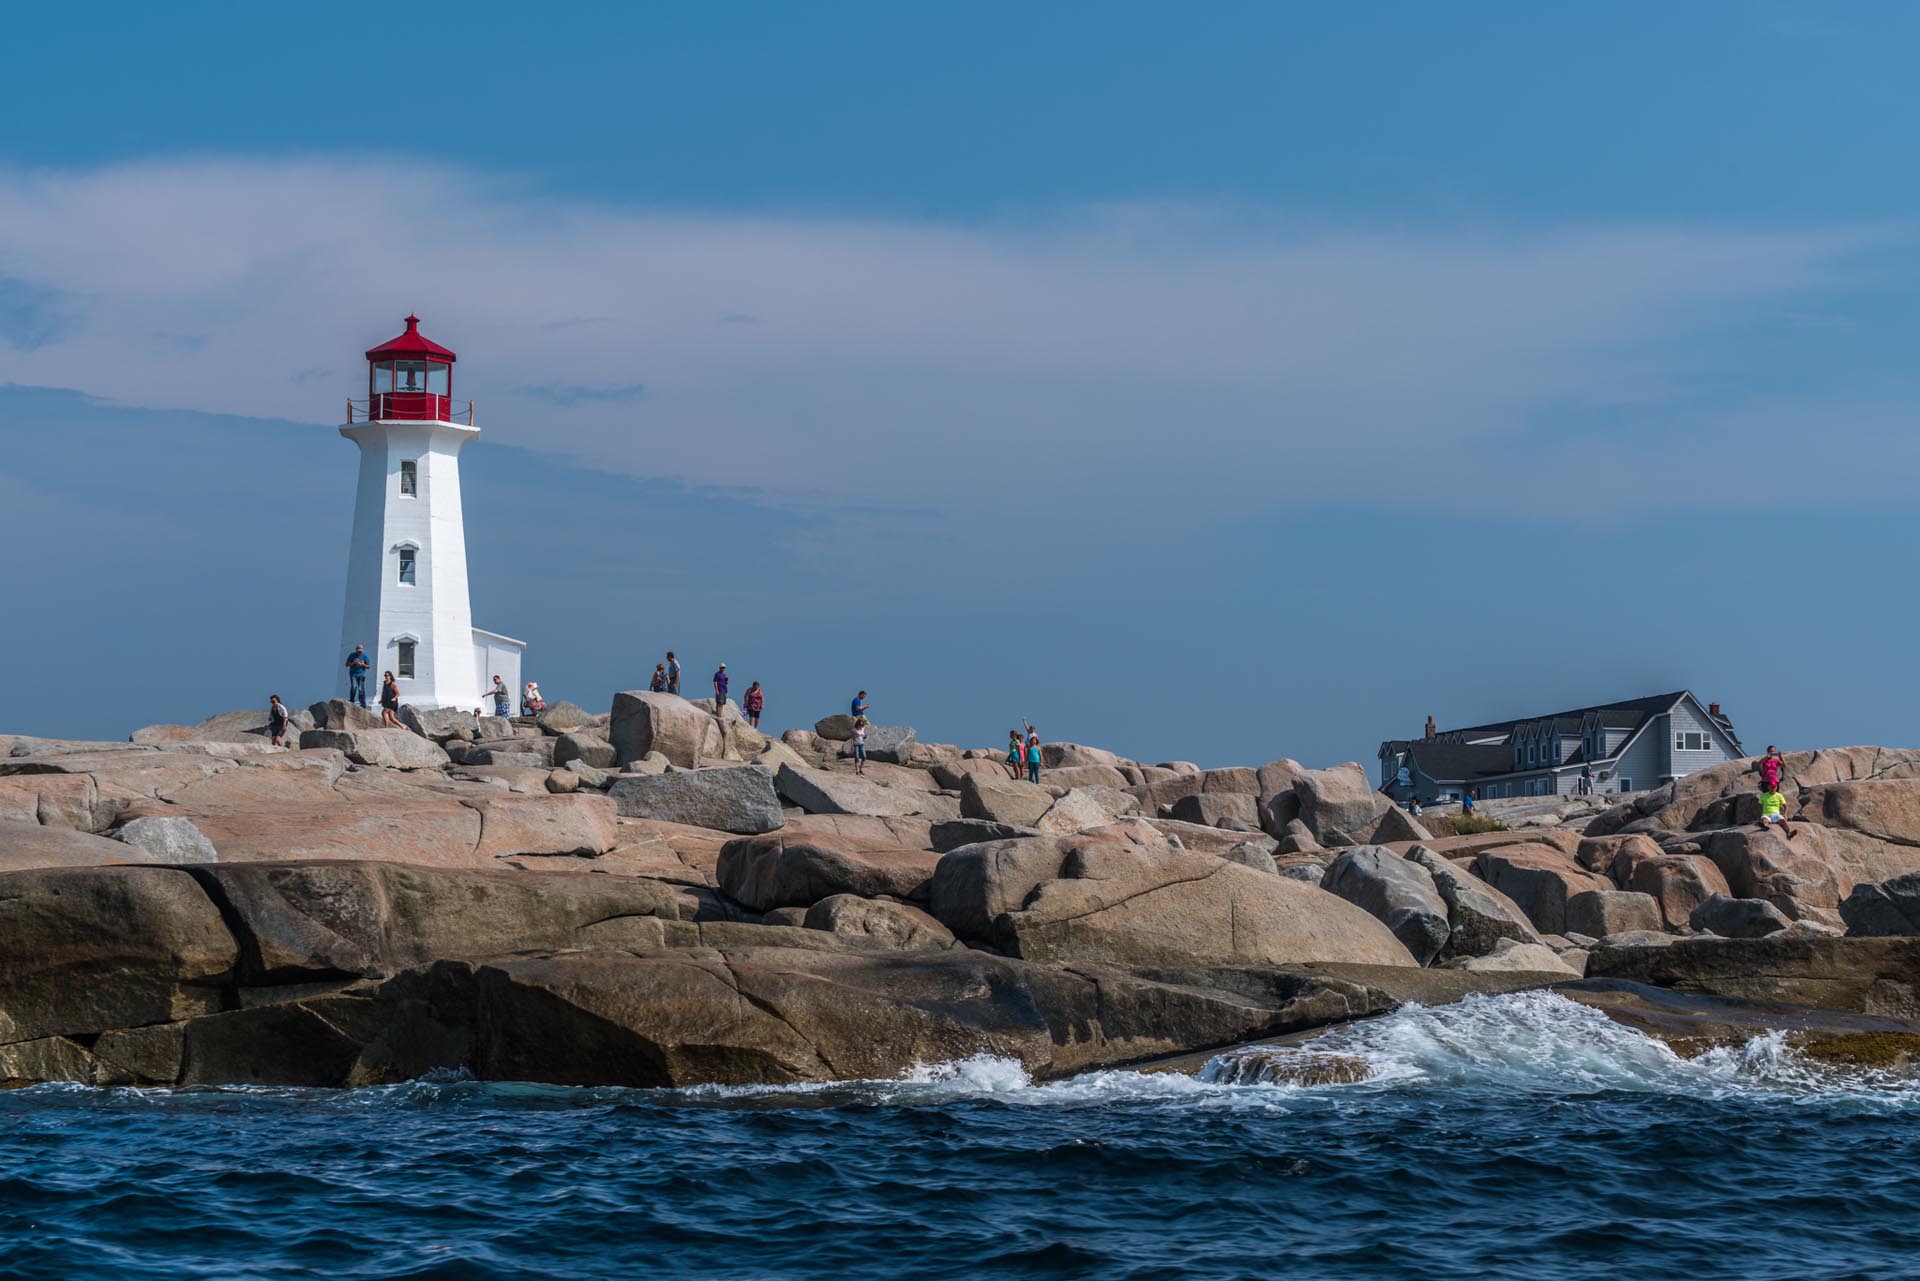 peggy's cove lighthouse from teh sea